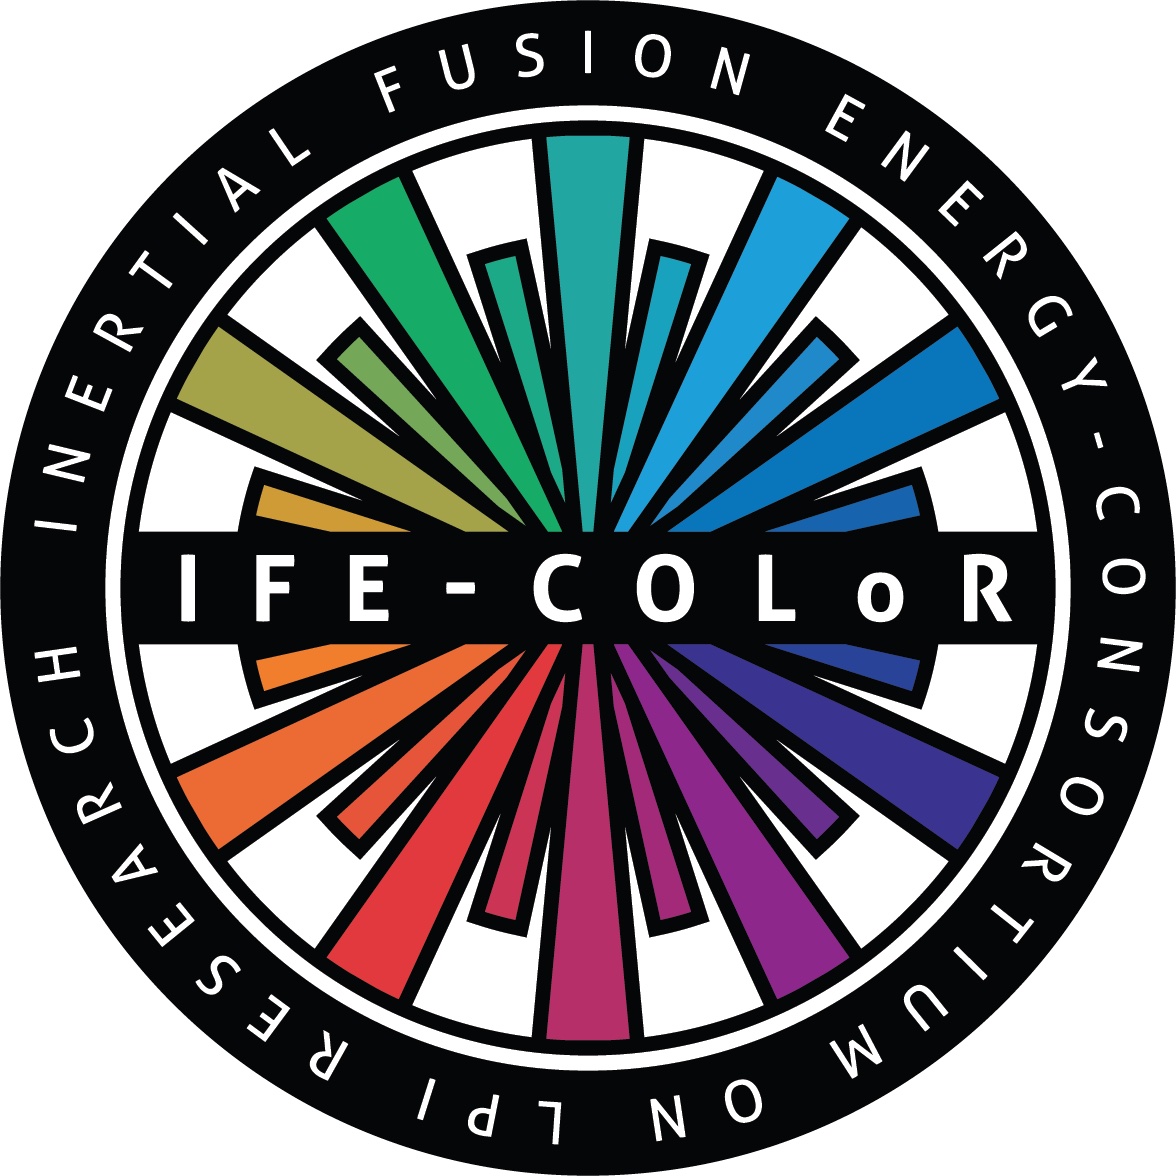 IFE-COLoR logo shows rainbow-colored beams emanating from the center to create a seal with the words inertial fusion energy consortium LPI research.